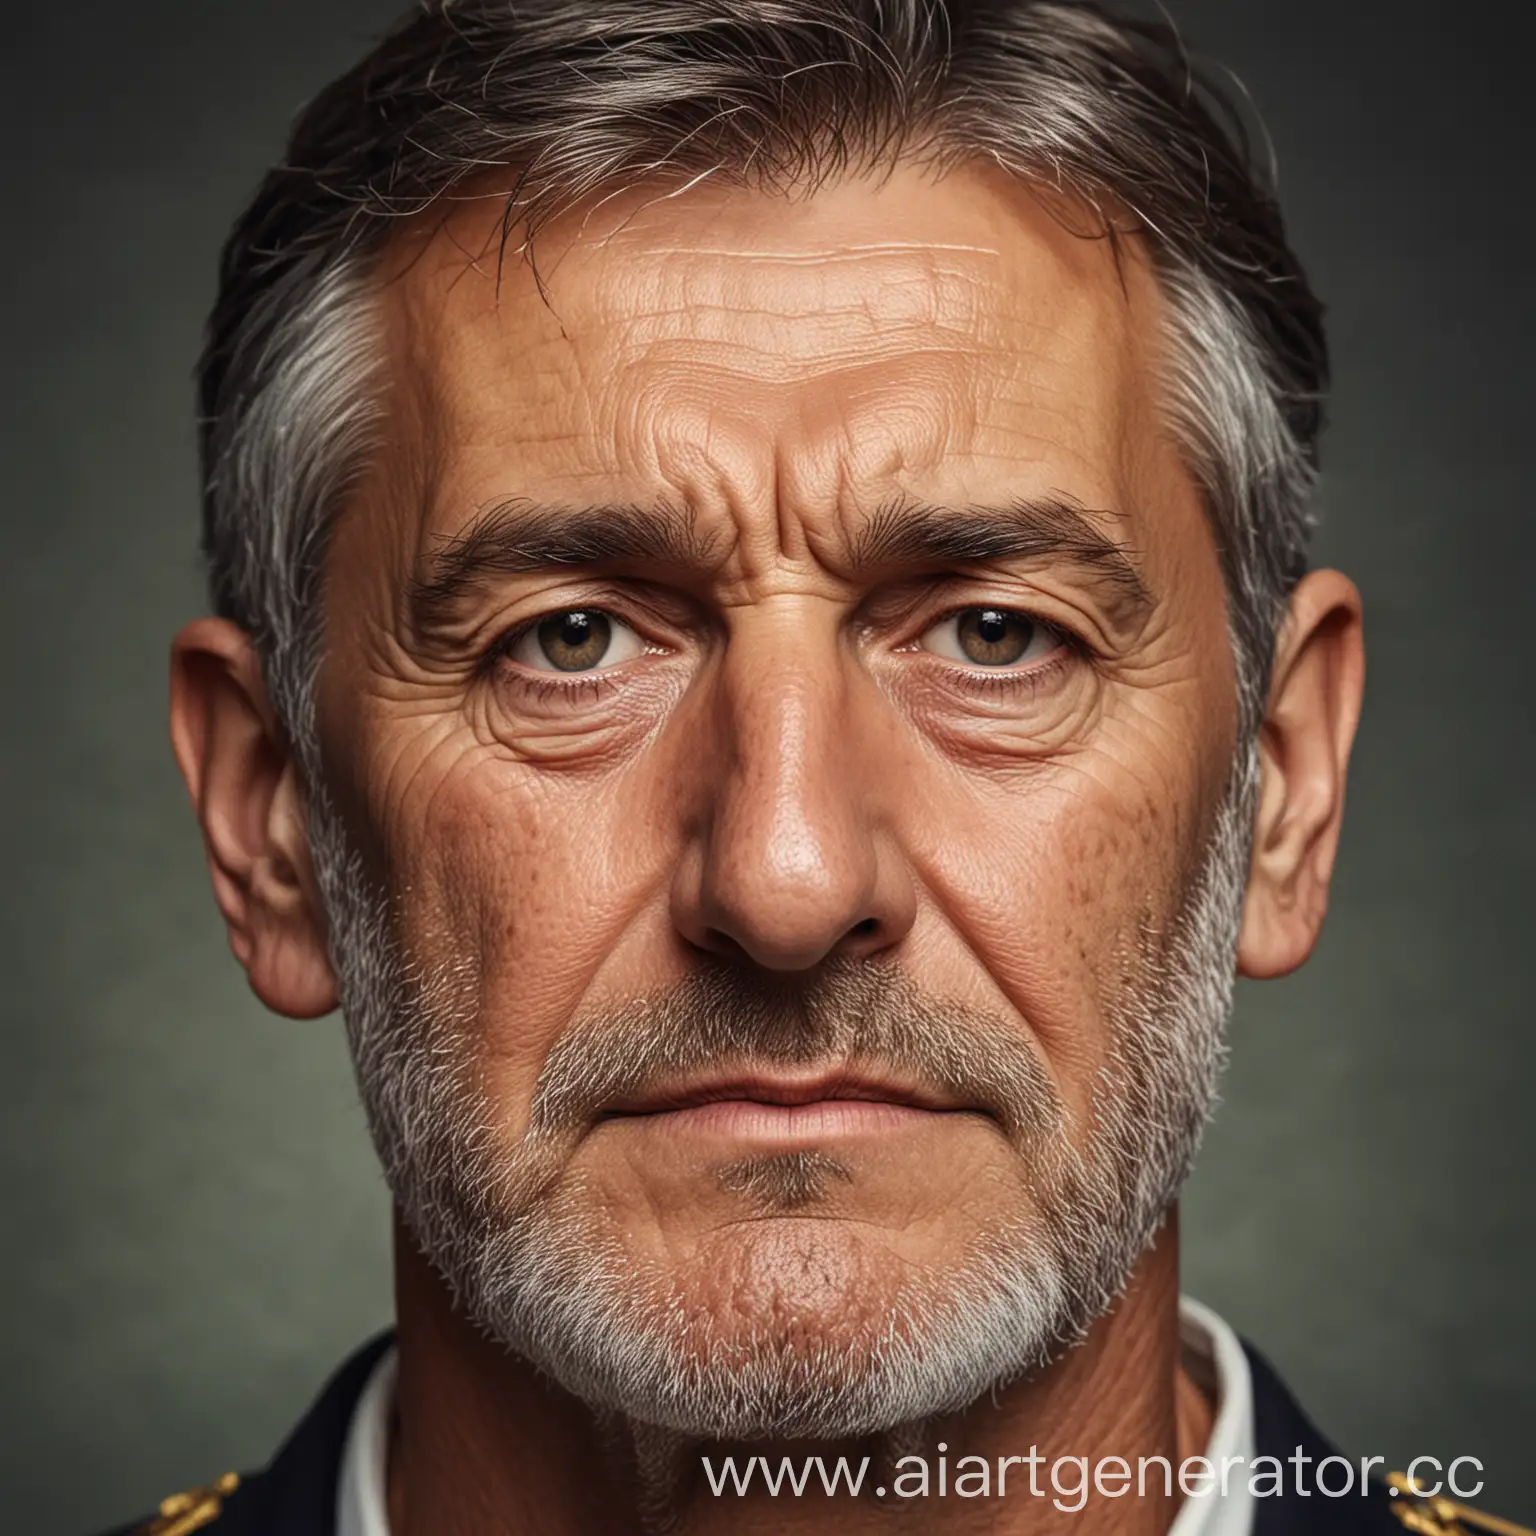 Serious-Captain-Portrait-of-an-Aging-Man-in-Command